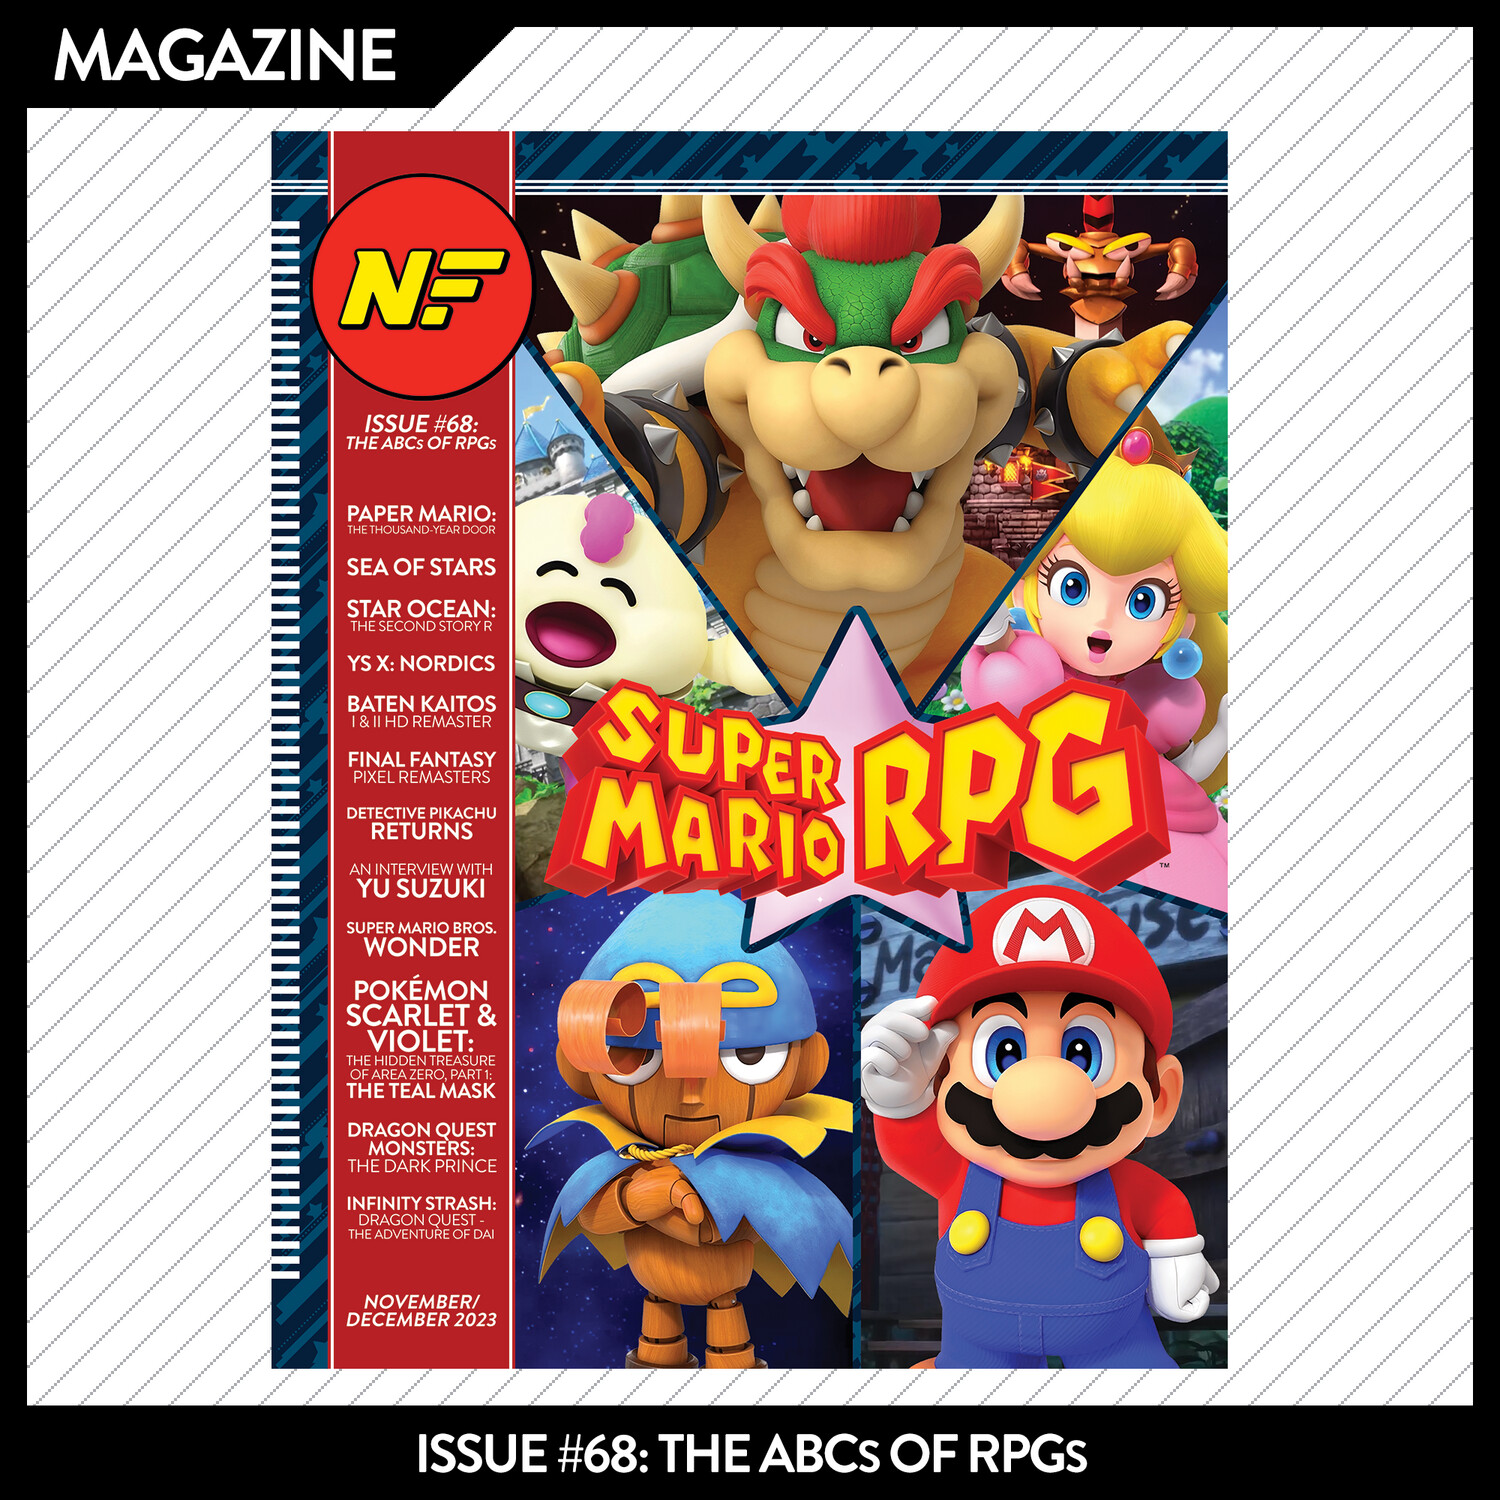 Issue #68: The ABCs of RPGs – November/December 2023